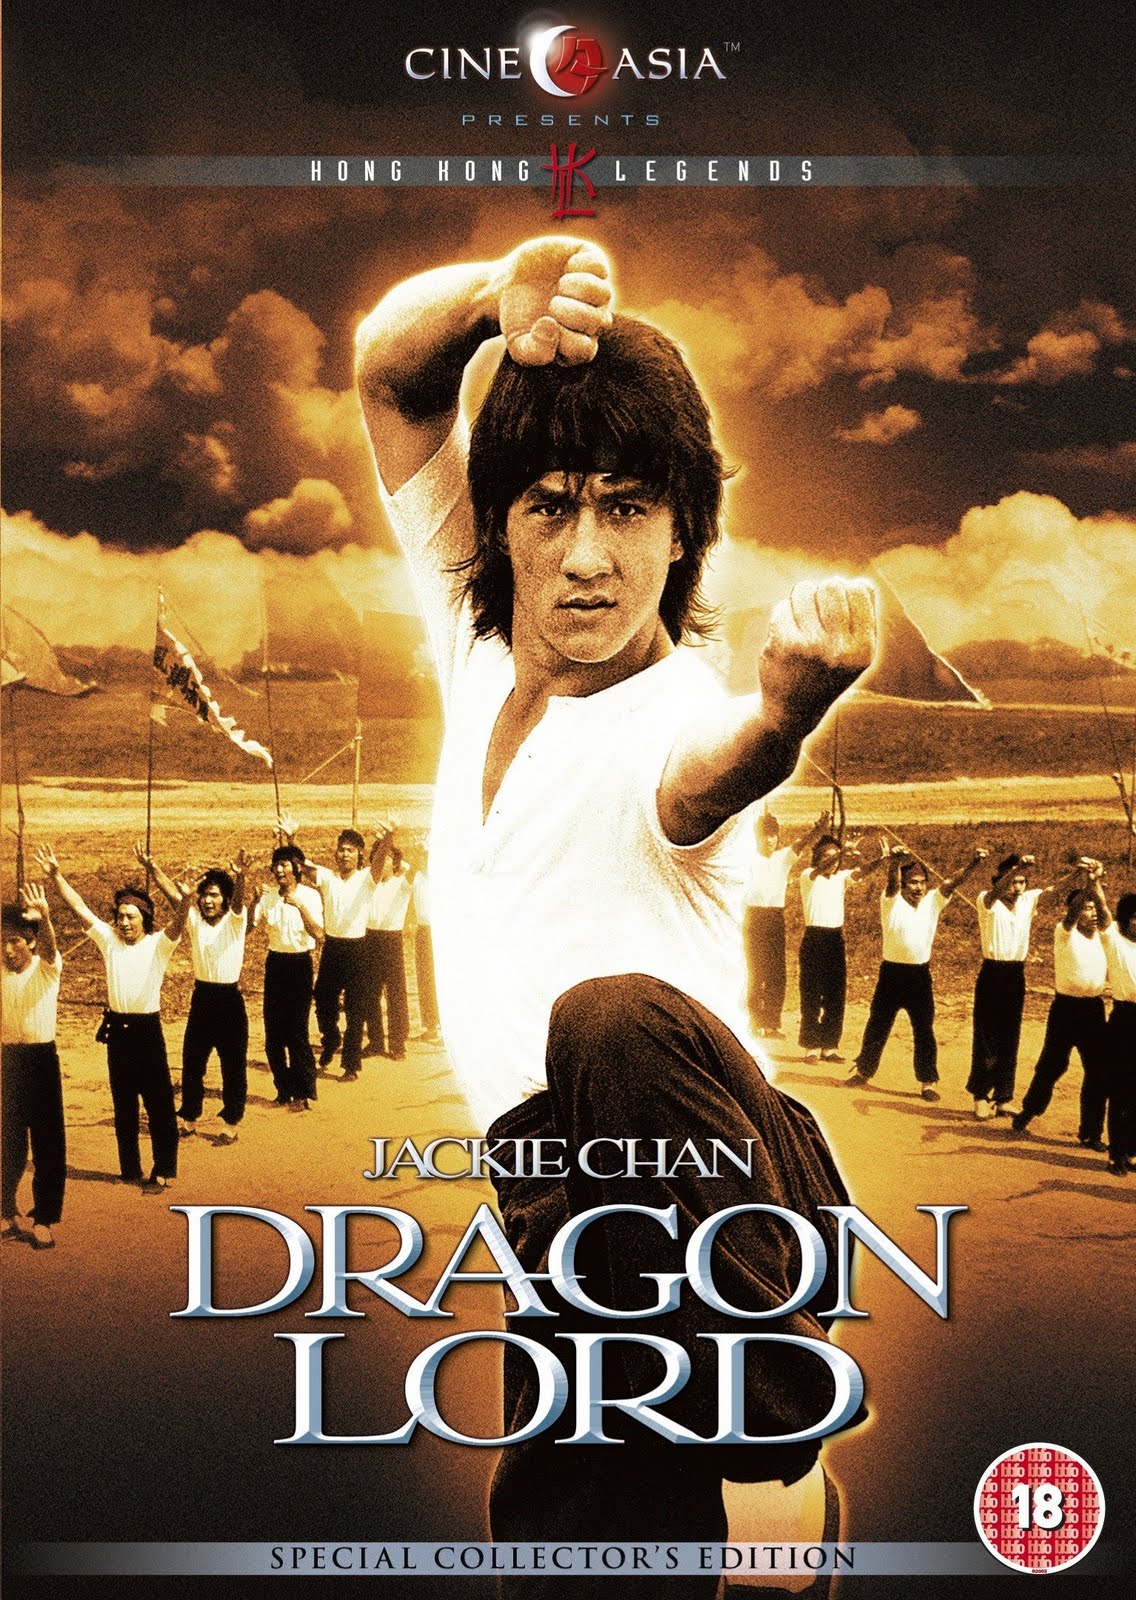 Dragon Lord with Jackie Chan